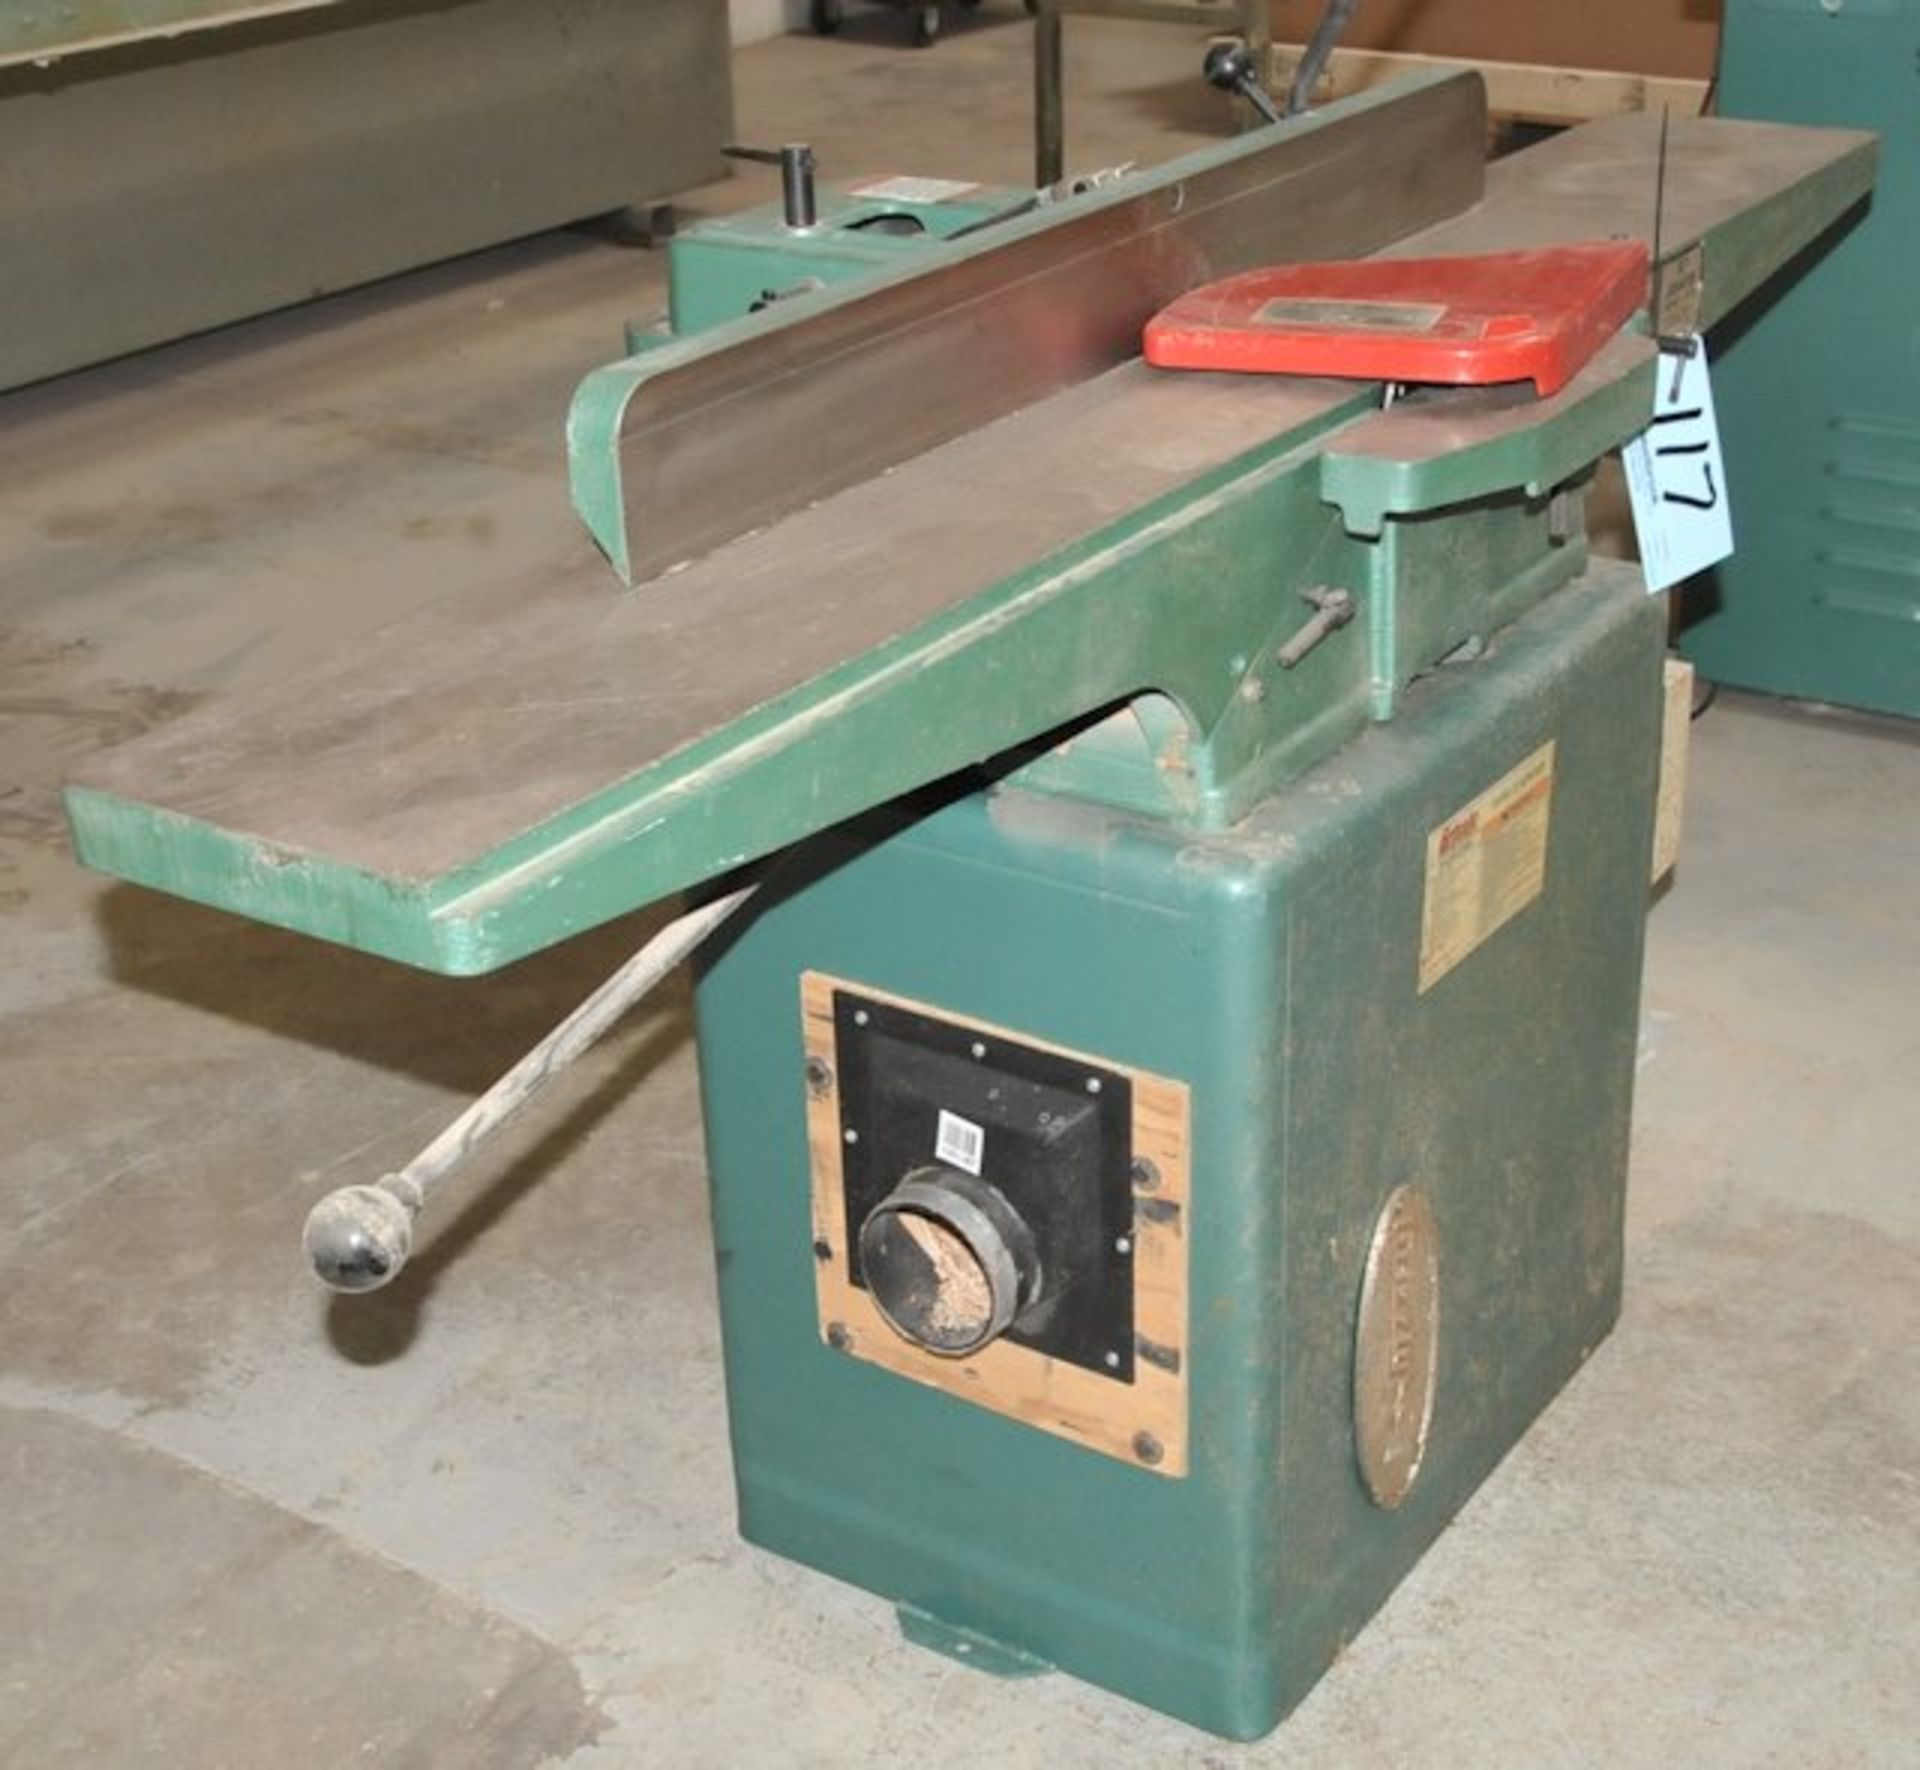 Grizzly Model G1018; 8" Jointer; S/n 588535; 1-PH - Image 3 of 4